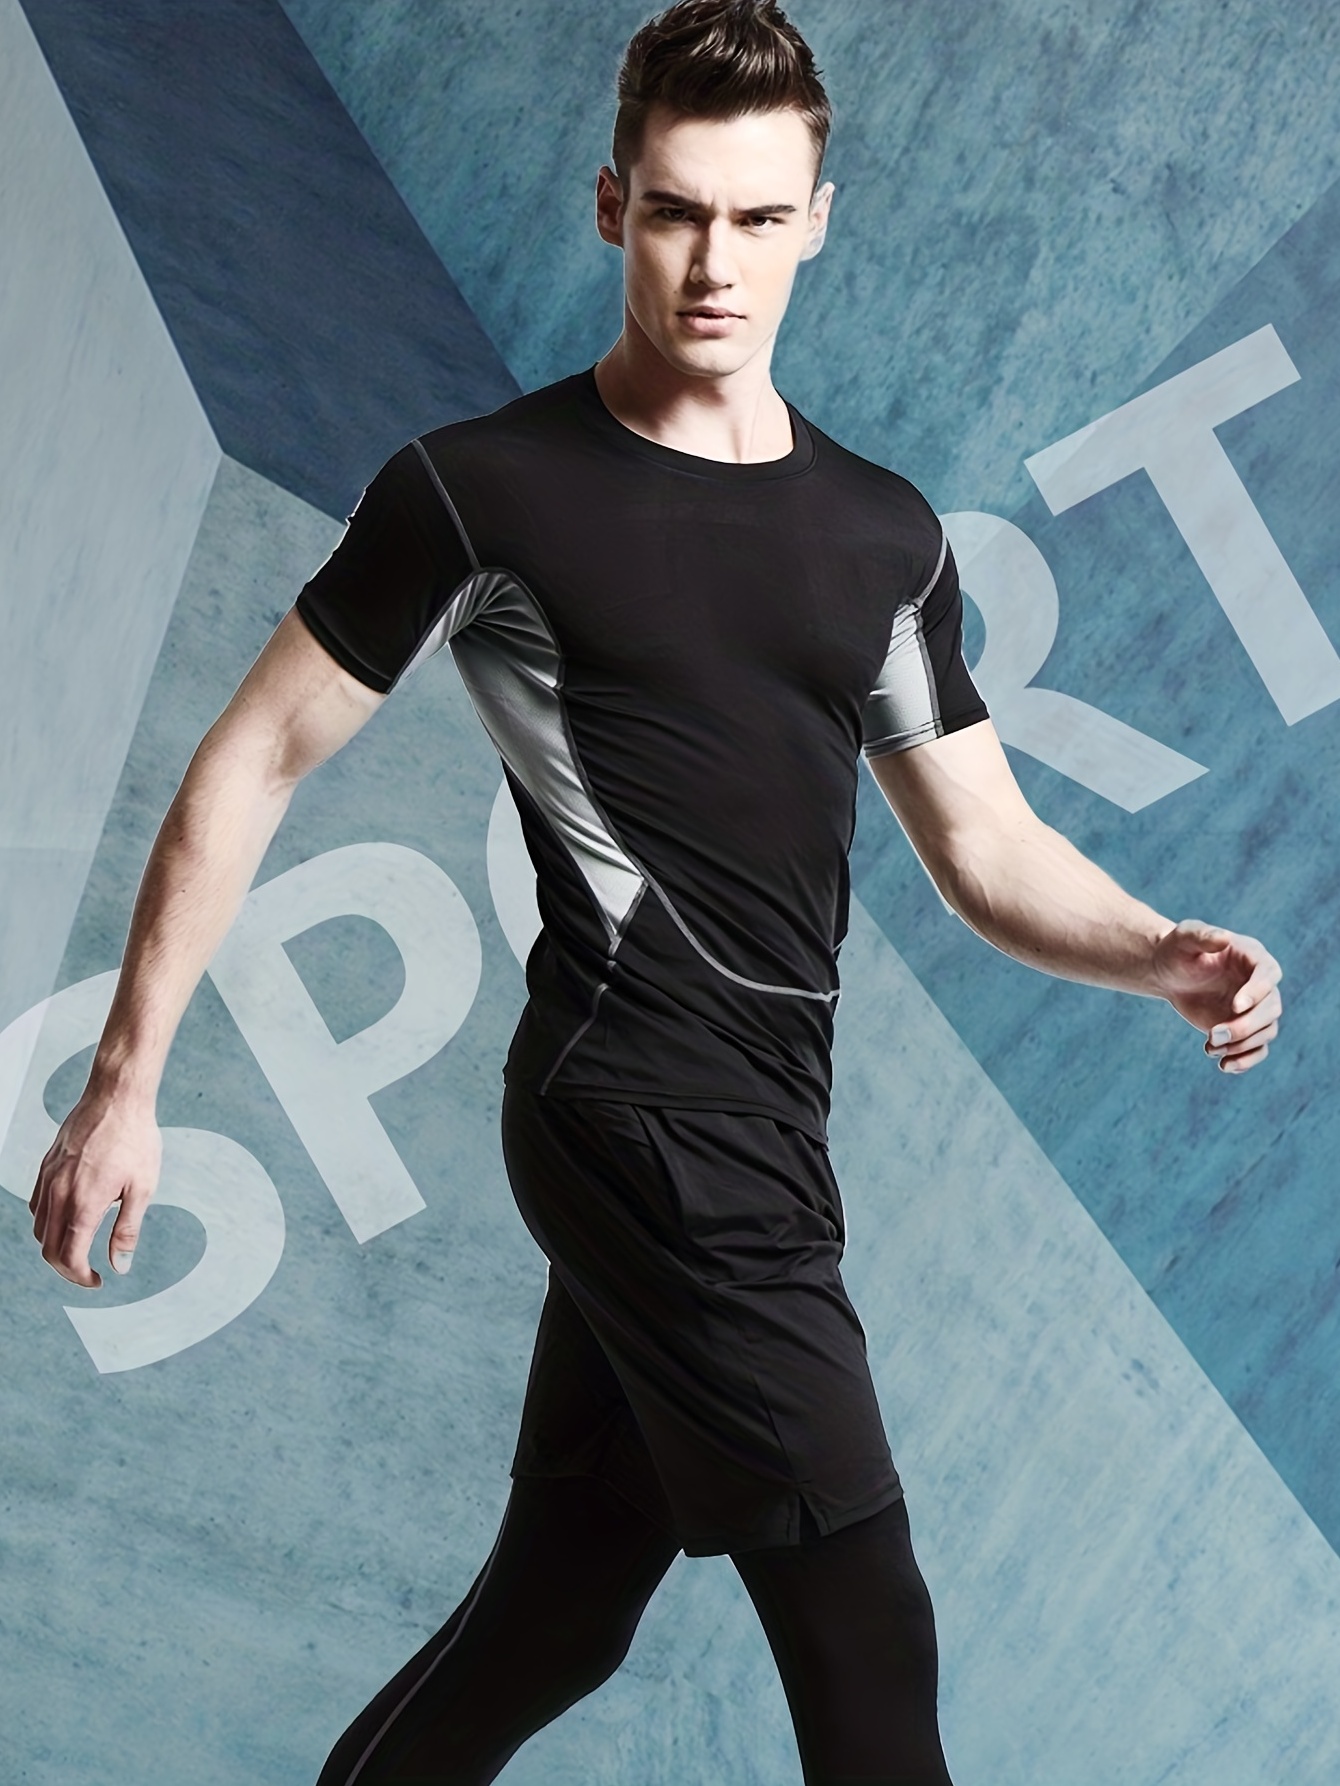 Shop Psyche Basketball Compression Shirt with great discounts and